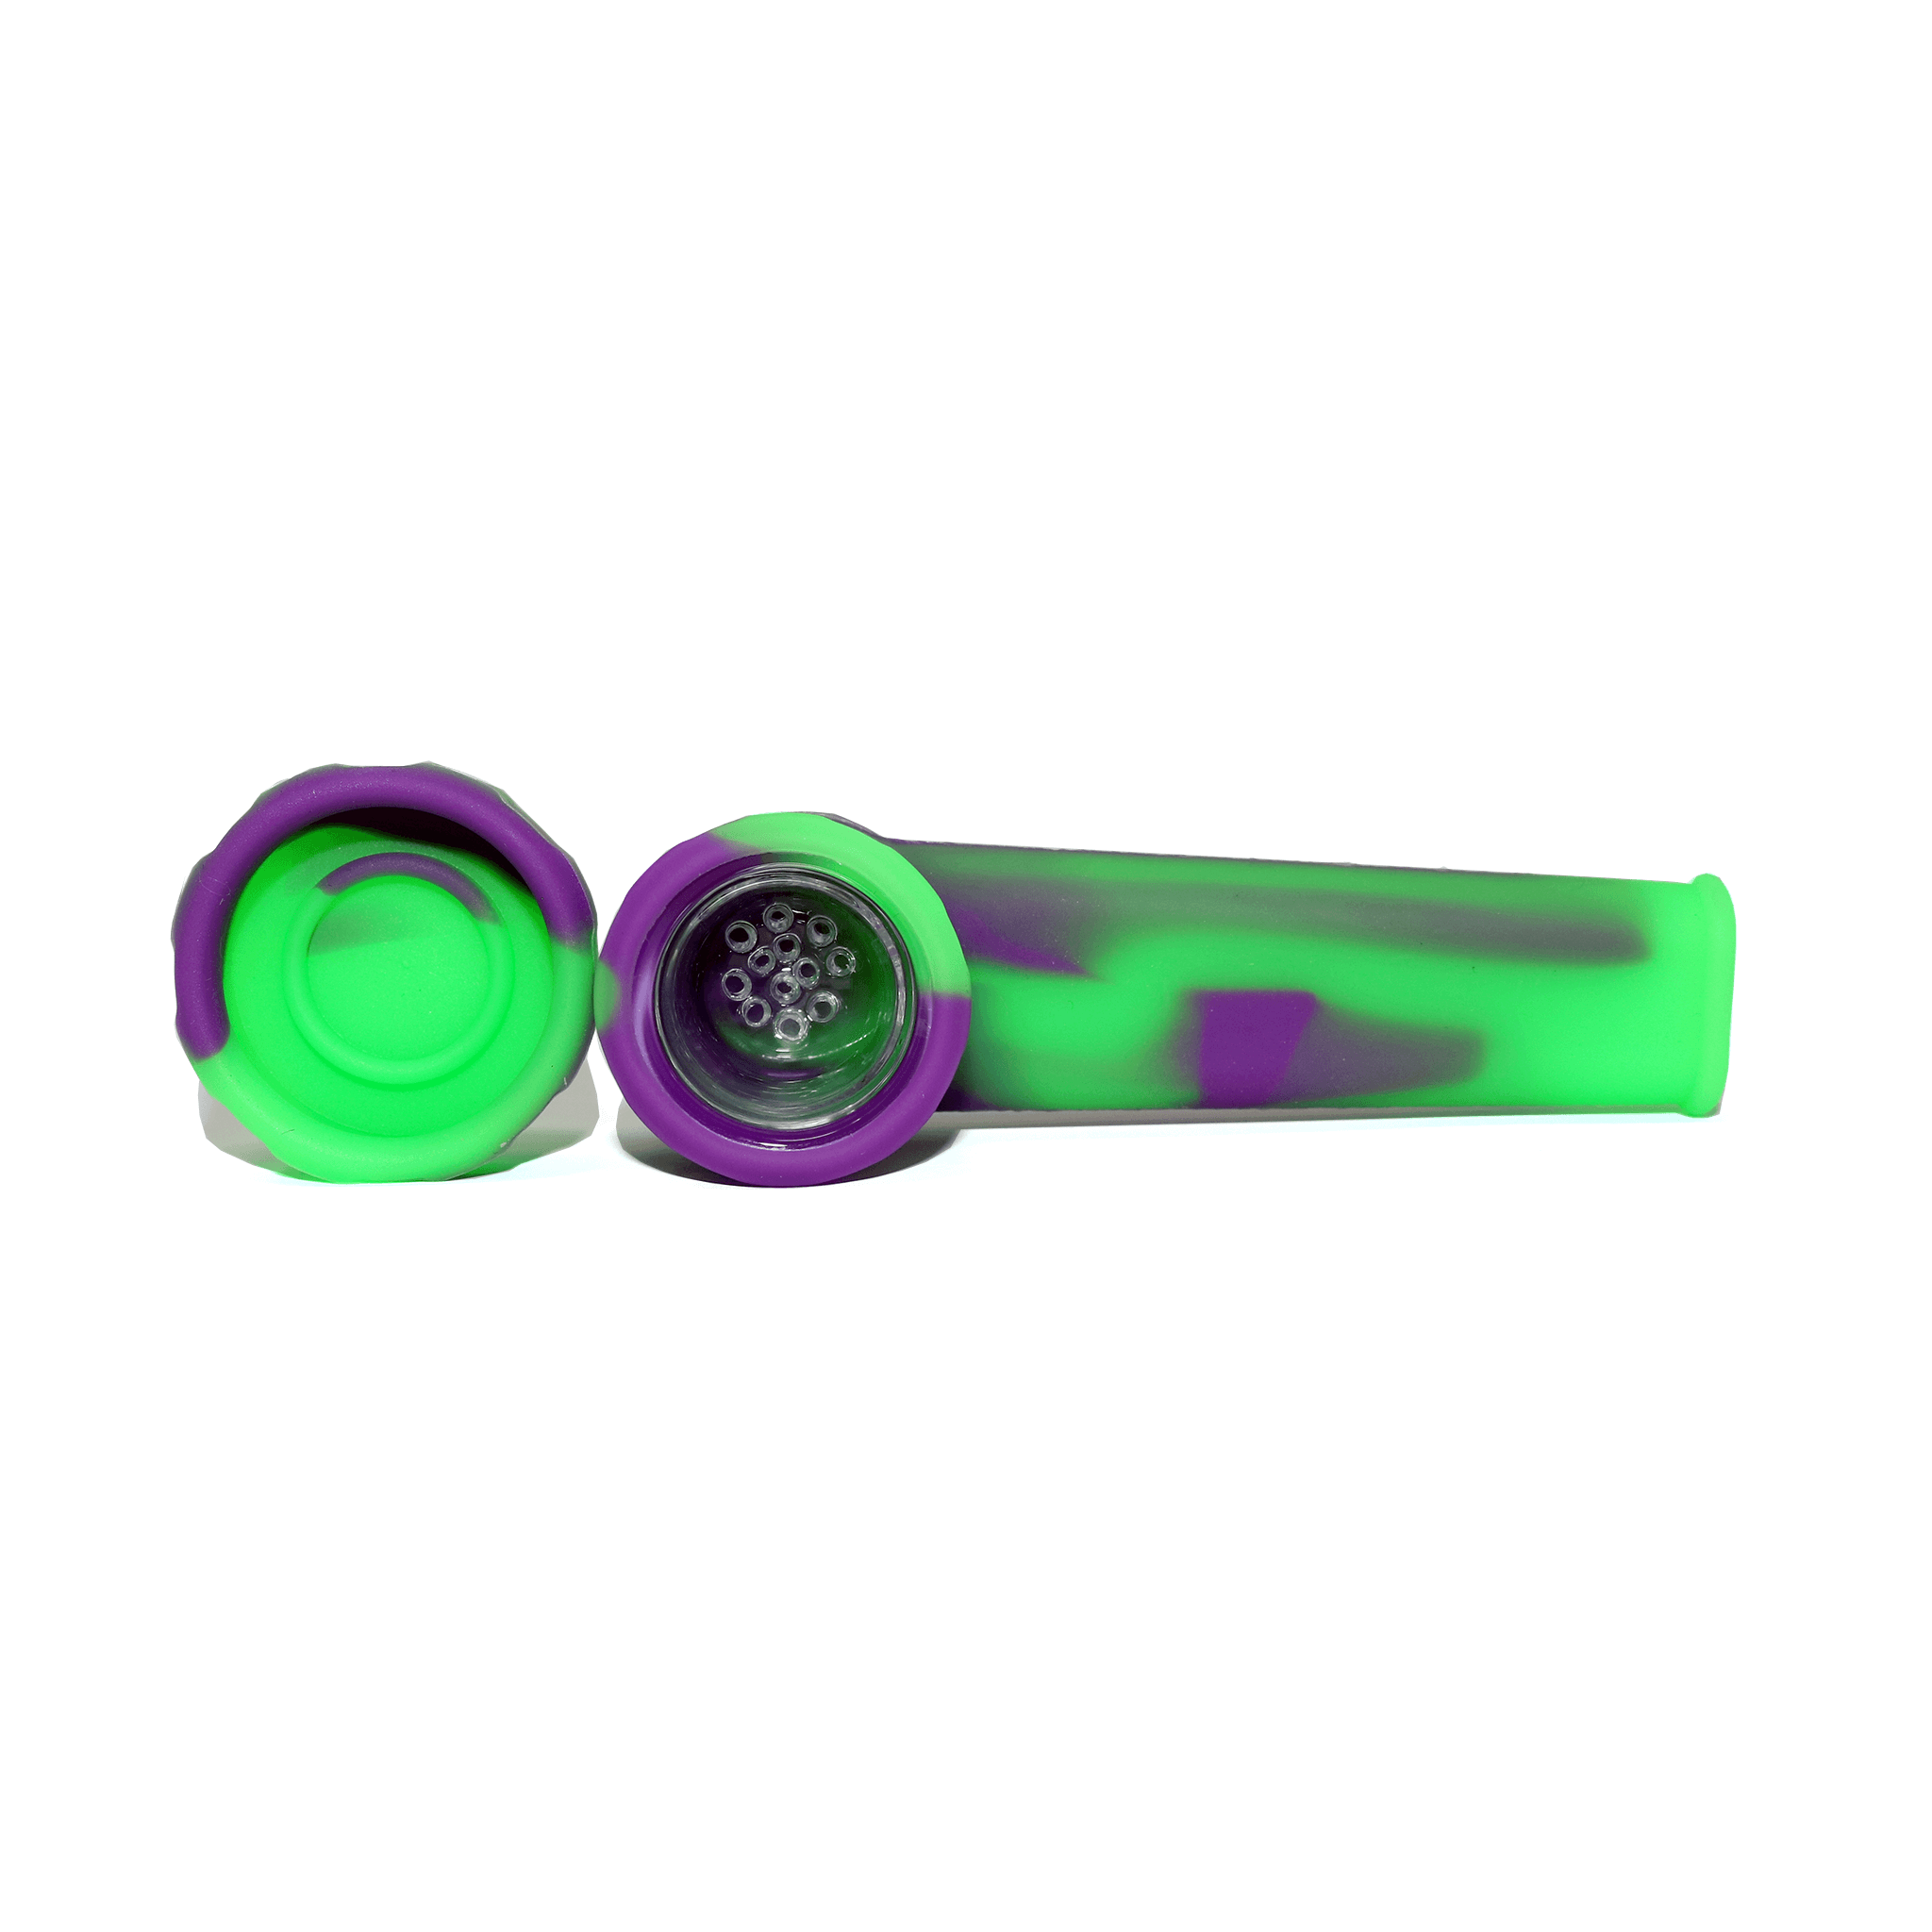 Silicone Smoking Pipe with Metal Bowl & Cap Lid